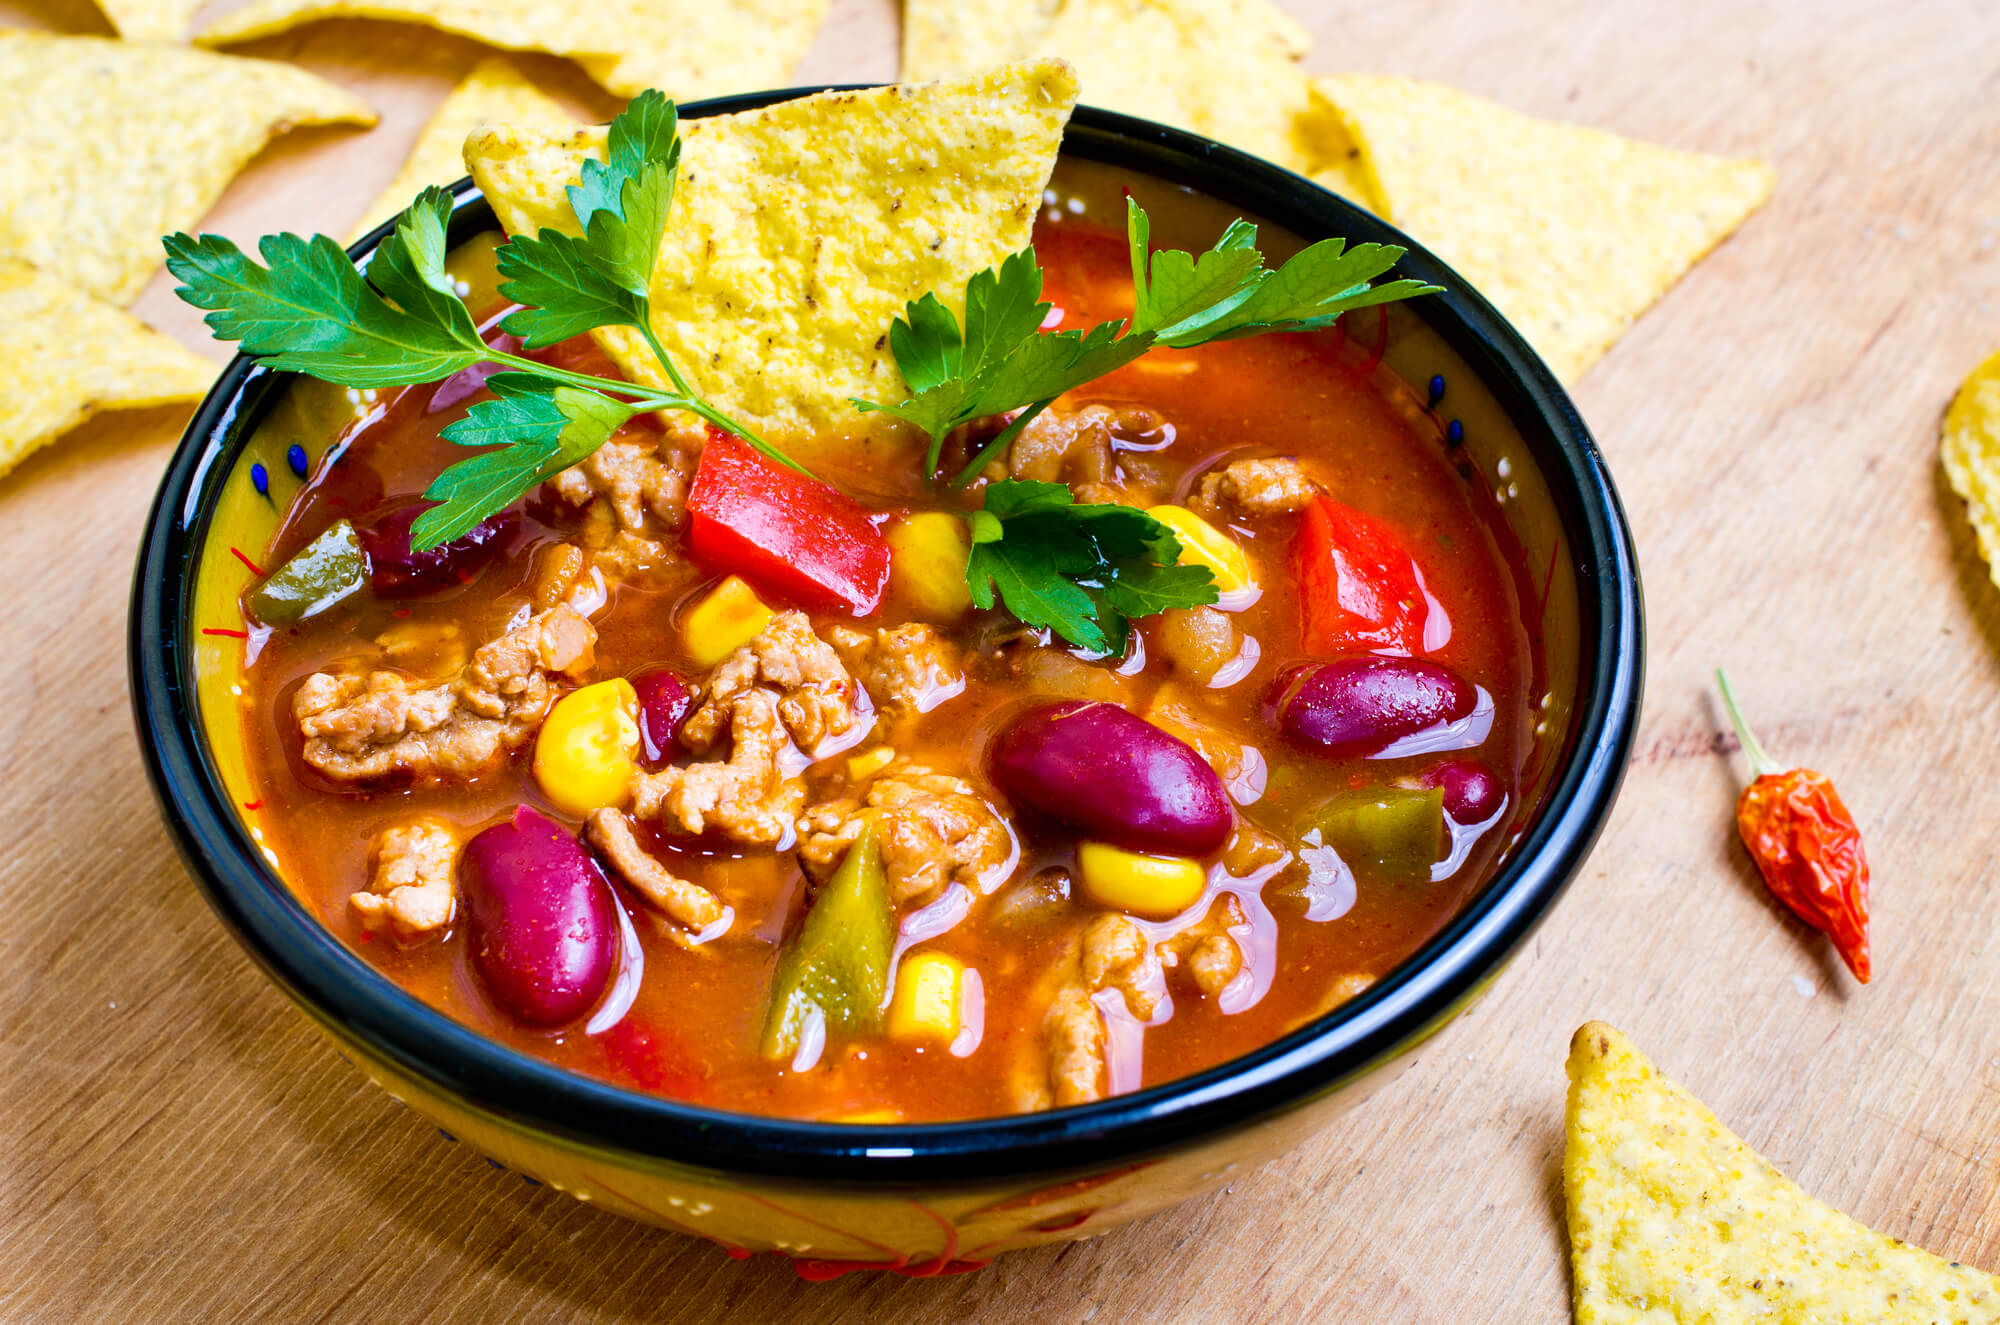 Leftover chicken be warned: you're not going to waste any more with this Trim Healthy Mama Chicken Chili recipe! It's THM:E, but still hearty and filling - a recipe you'll want to make over and over again!